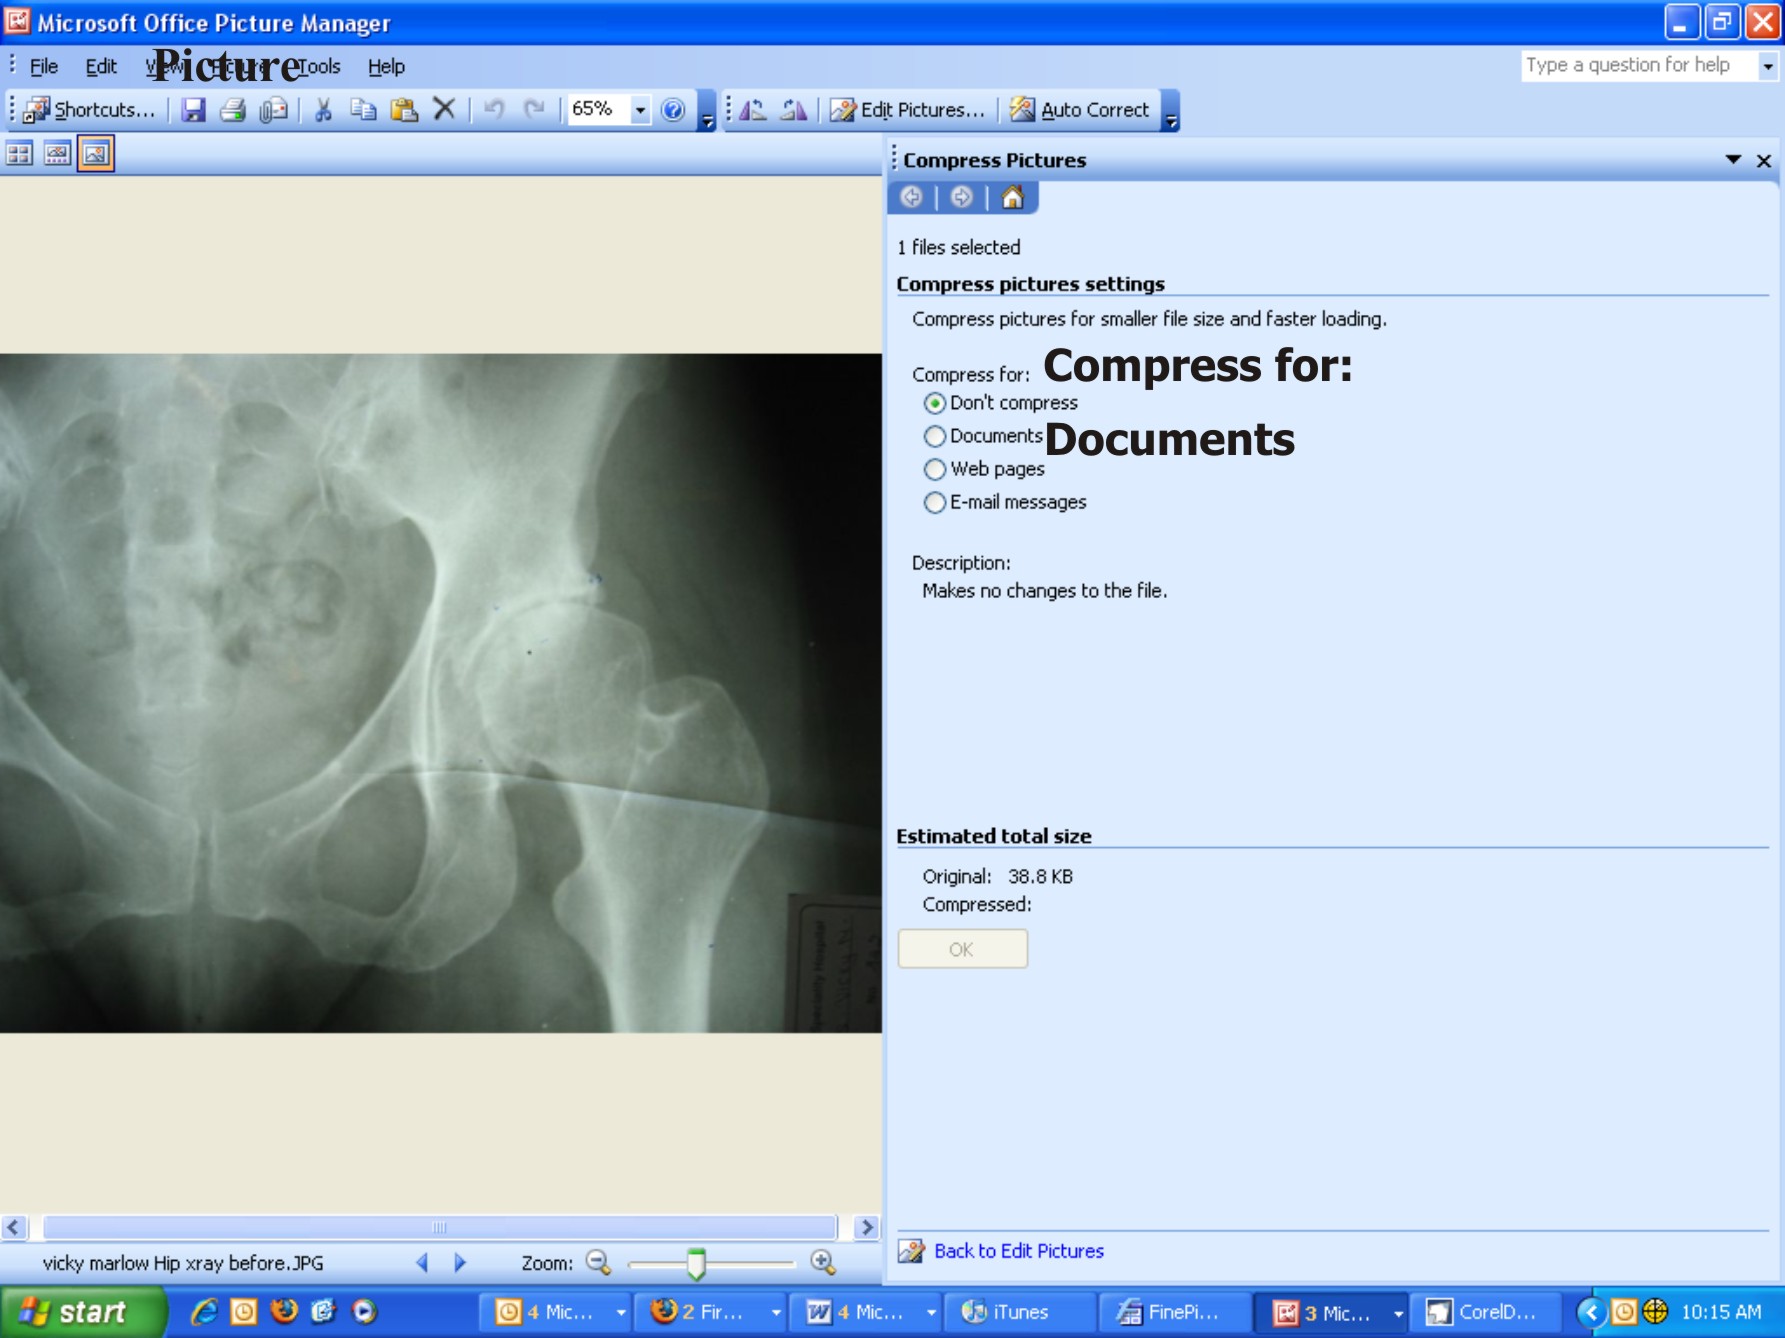 x ray viewer for mac